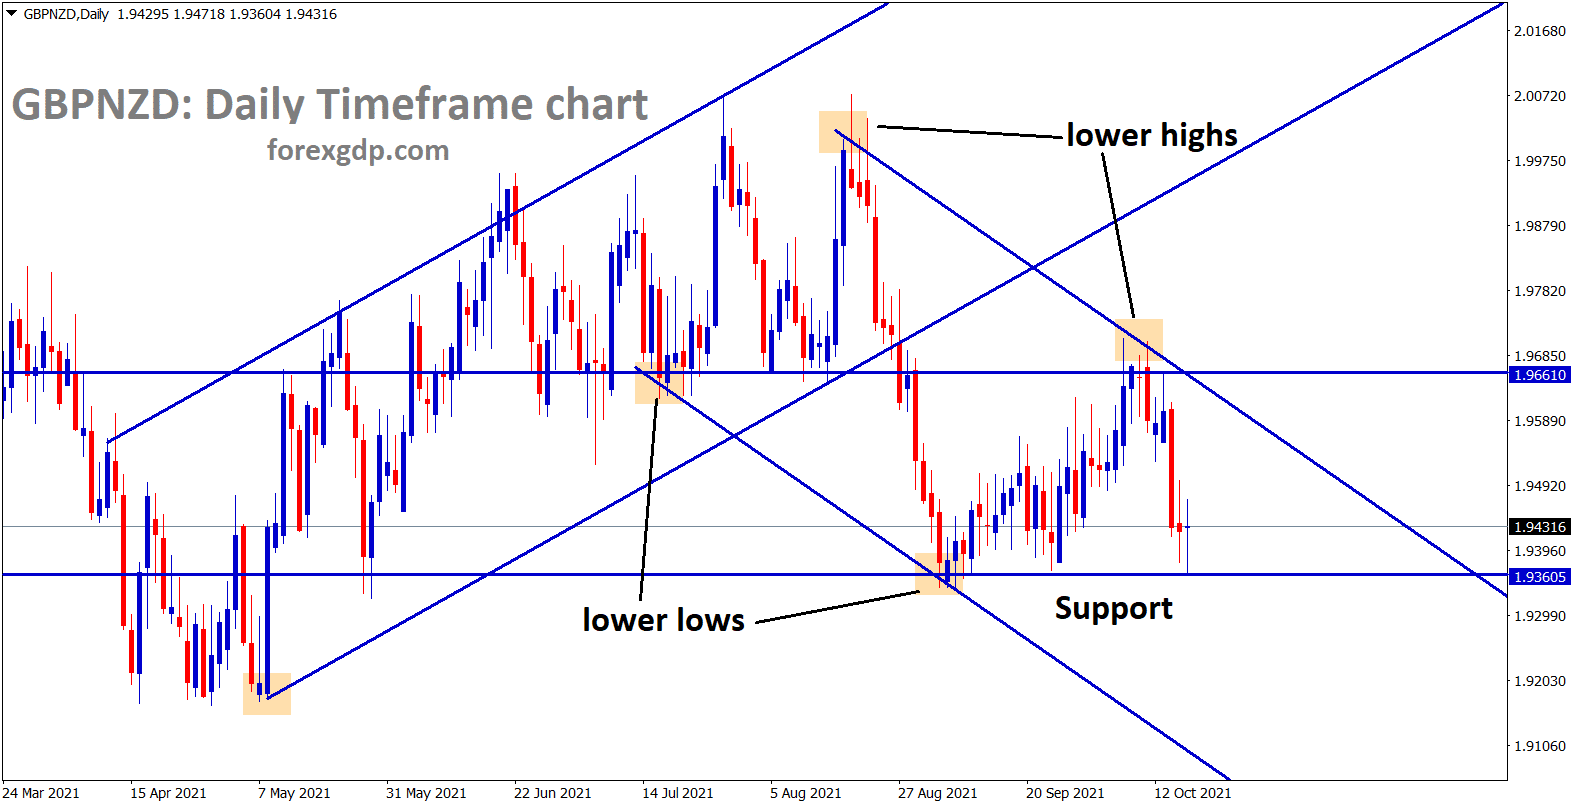 GBPNZD has tested the horizontal support area recently